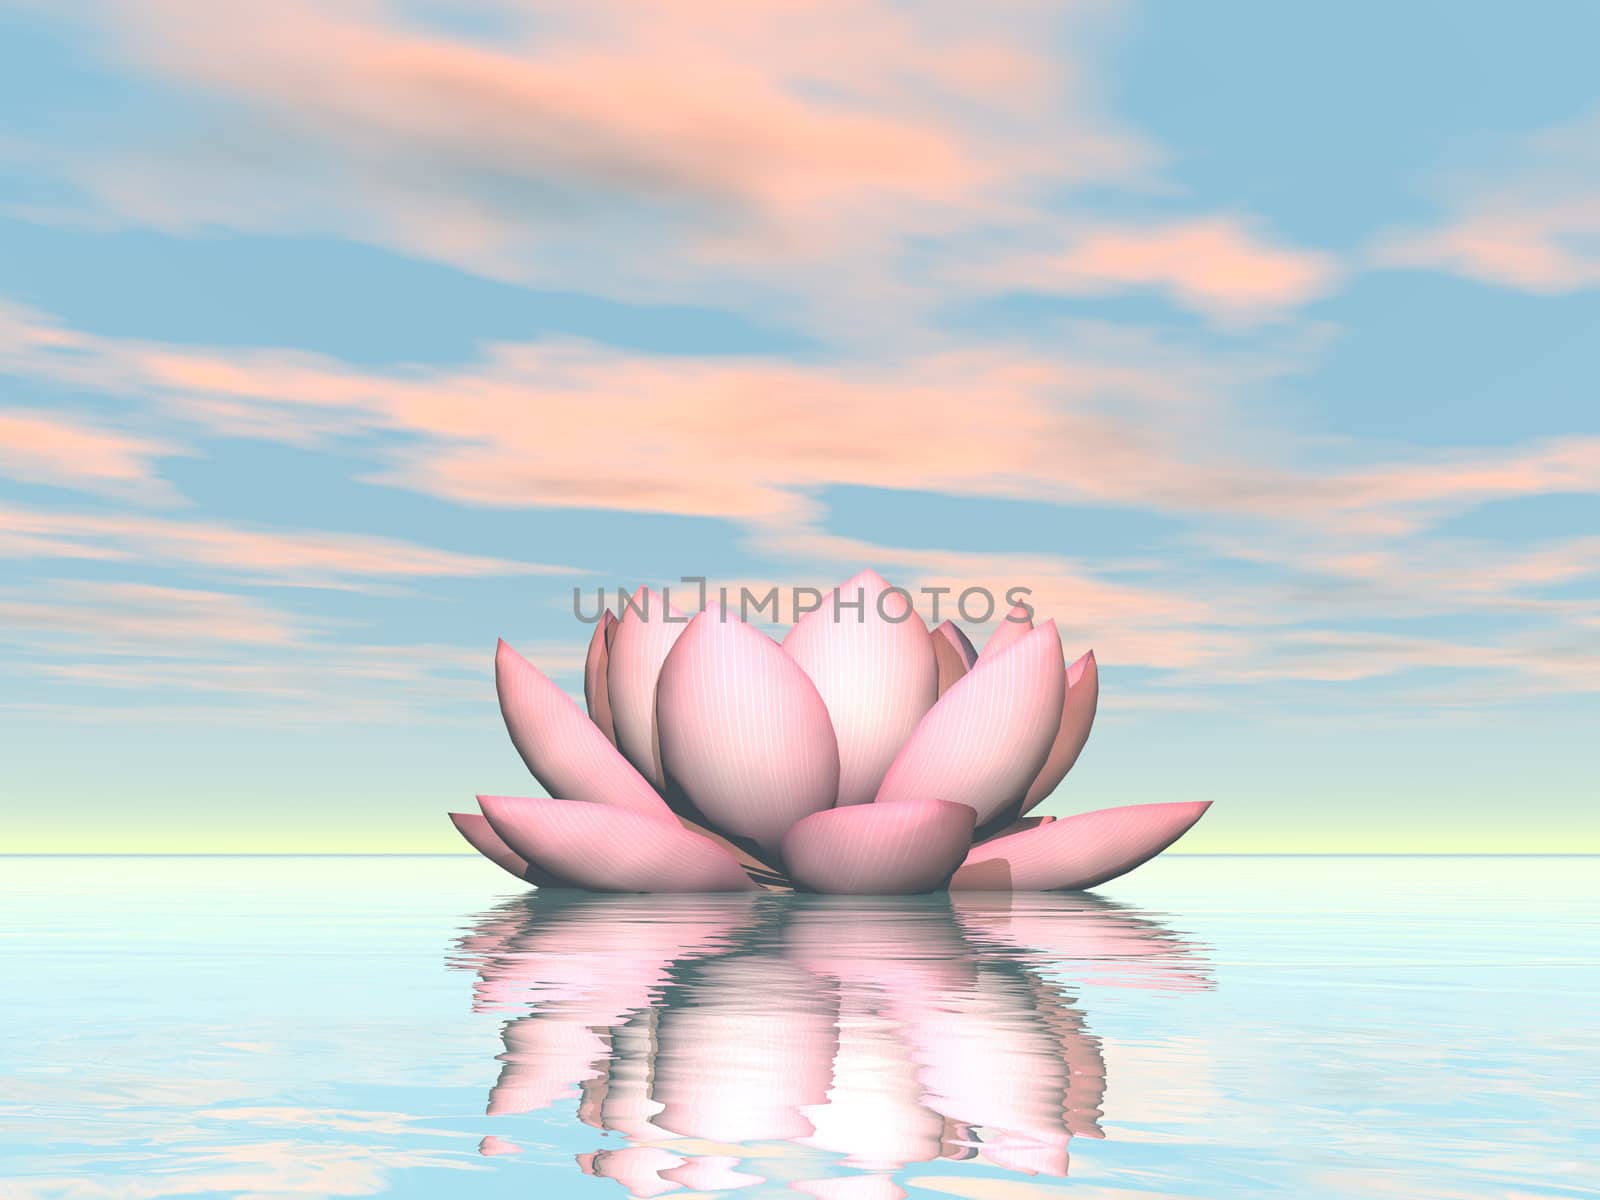 Single lily lotus flower upon water in pink and green sunset background - 3D render